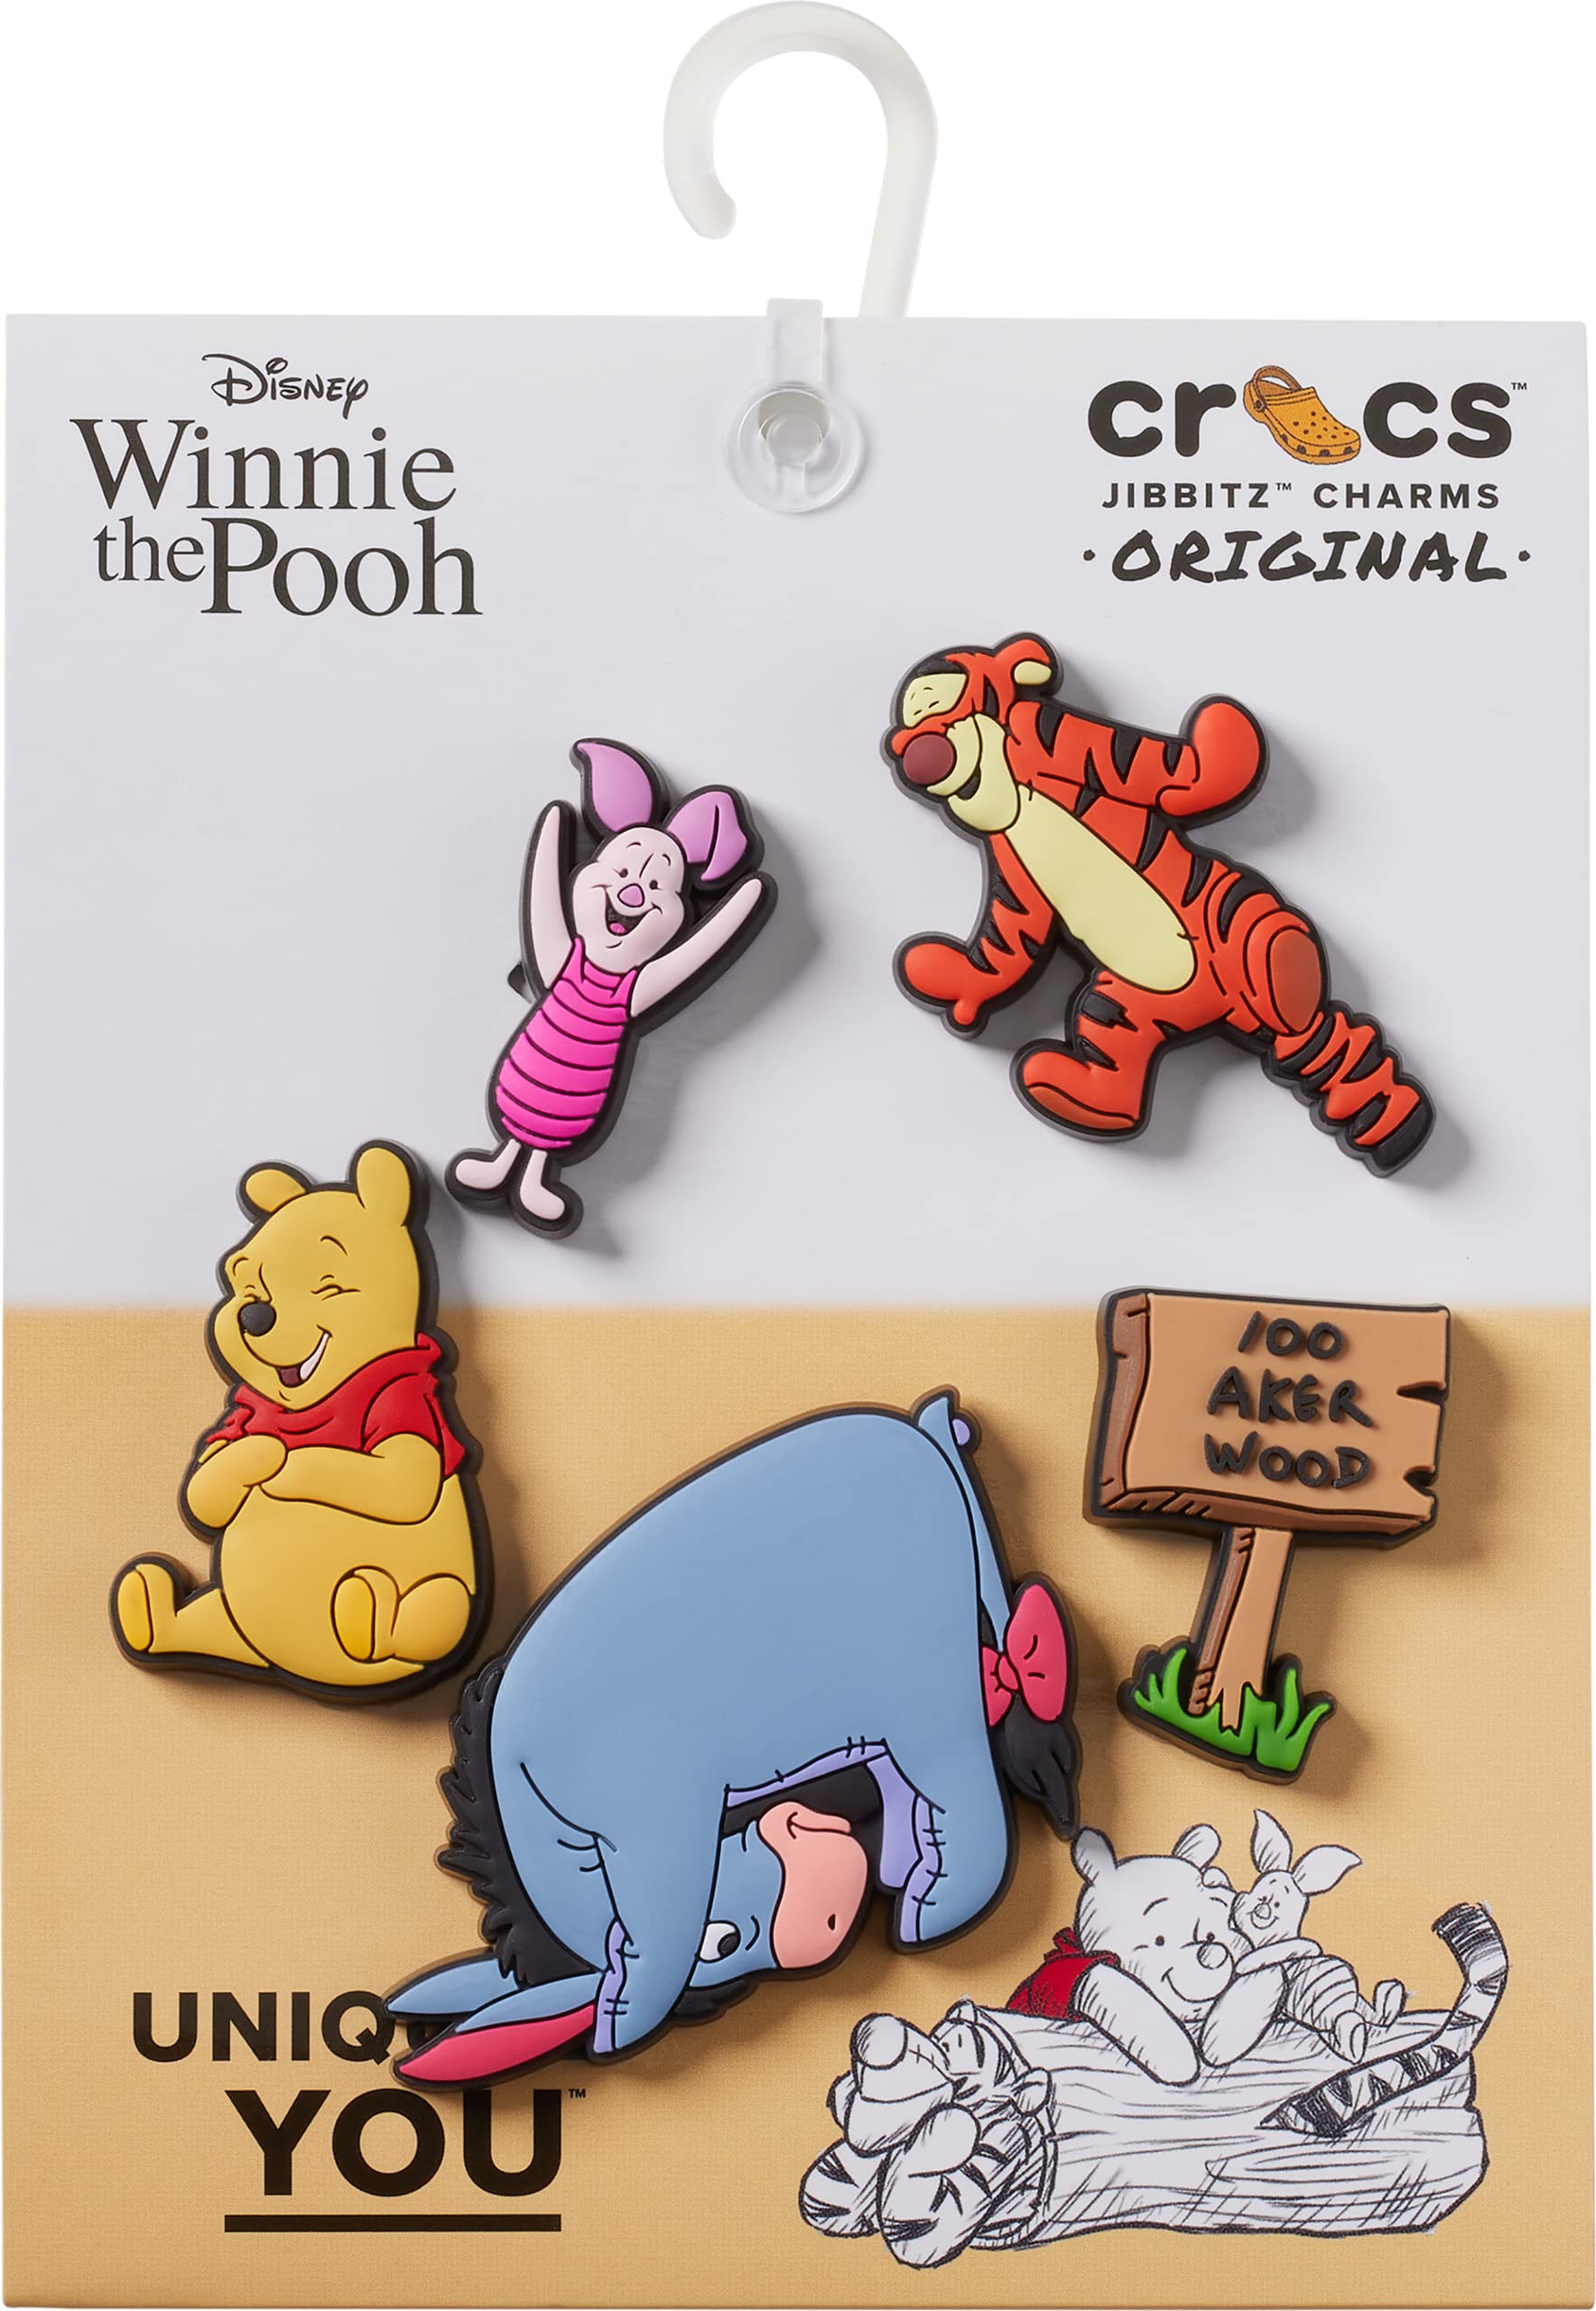 Crocs Jibbitz Shoe Charms Disney Charms Multi Pack - Mickey Mouse, Minnie Mouse, Shoe Charms Characters